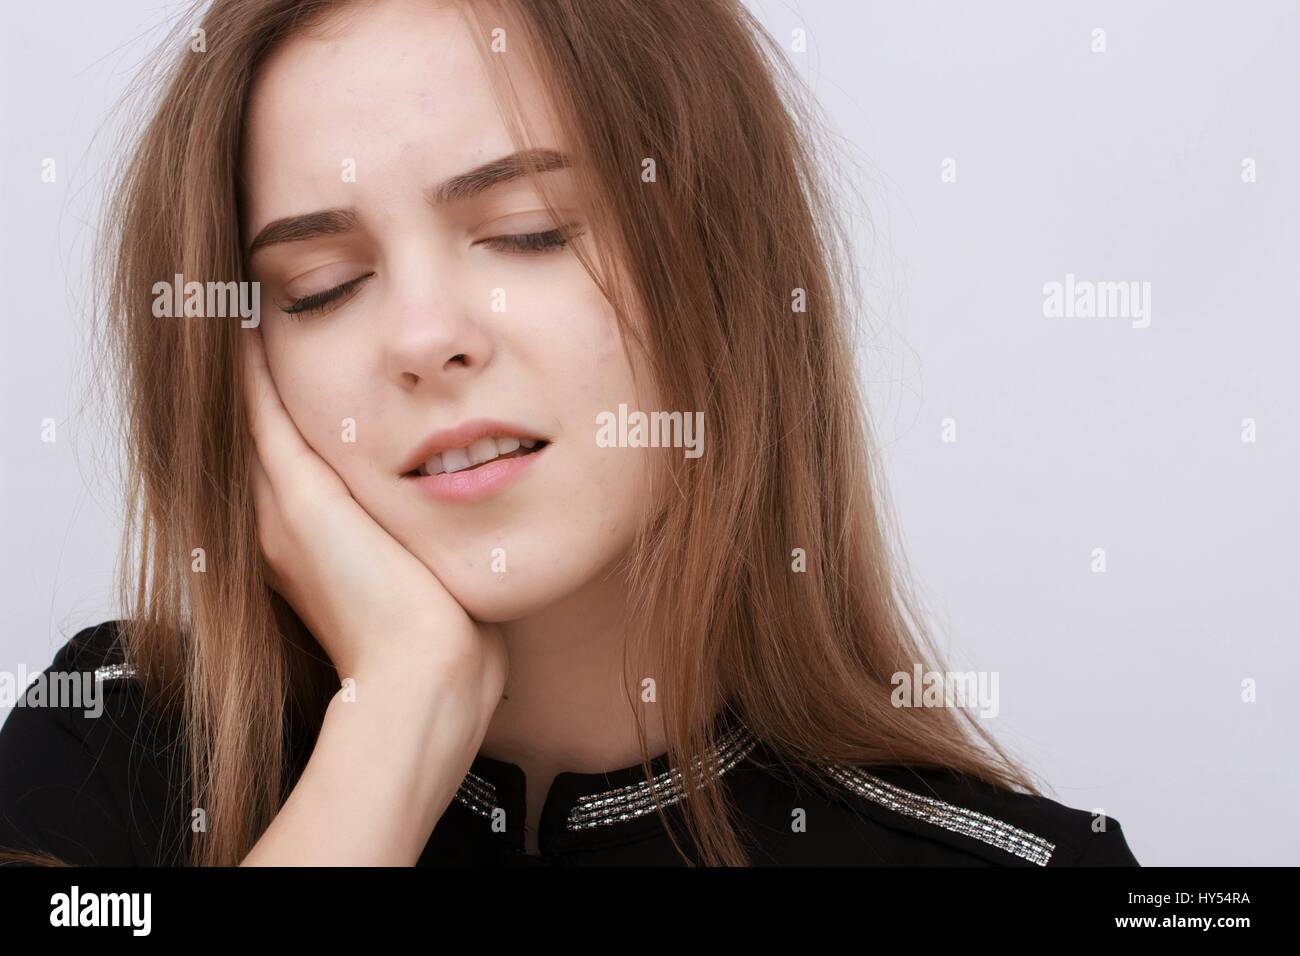 Woman has toothache coppy space Isolated on white background. Stock Photo